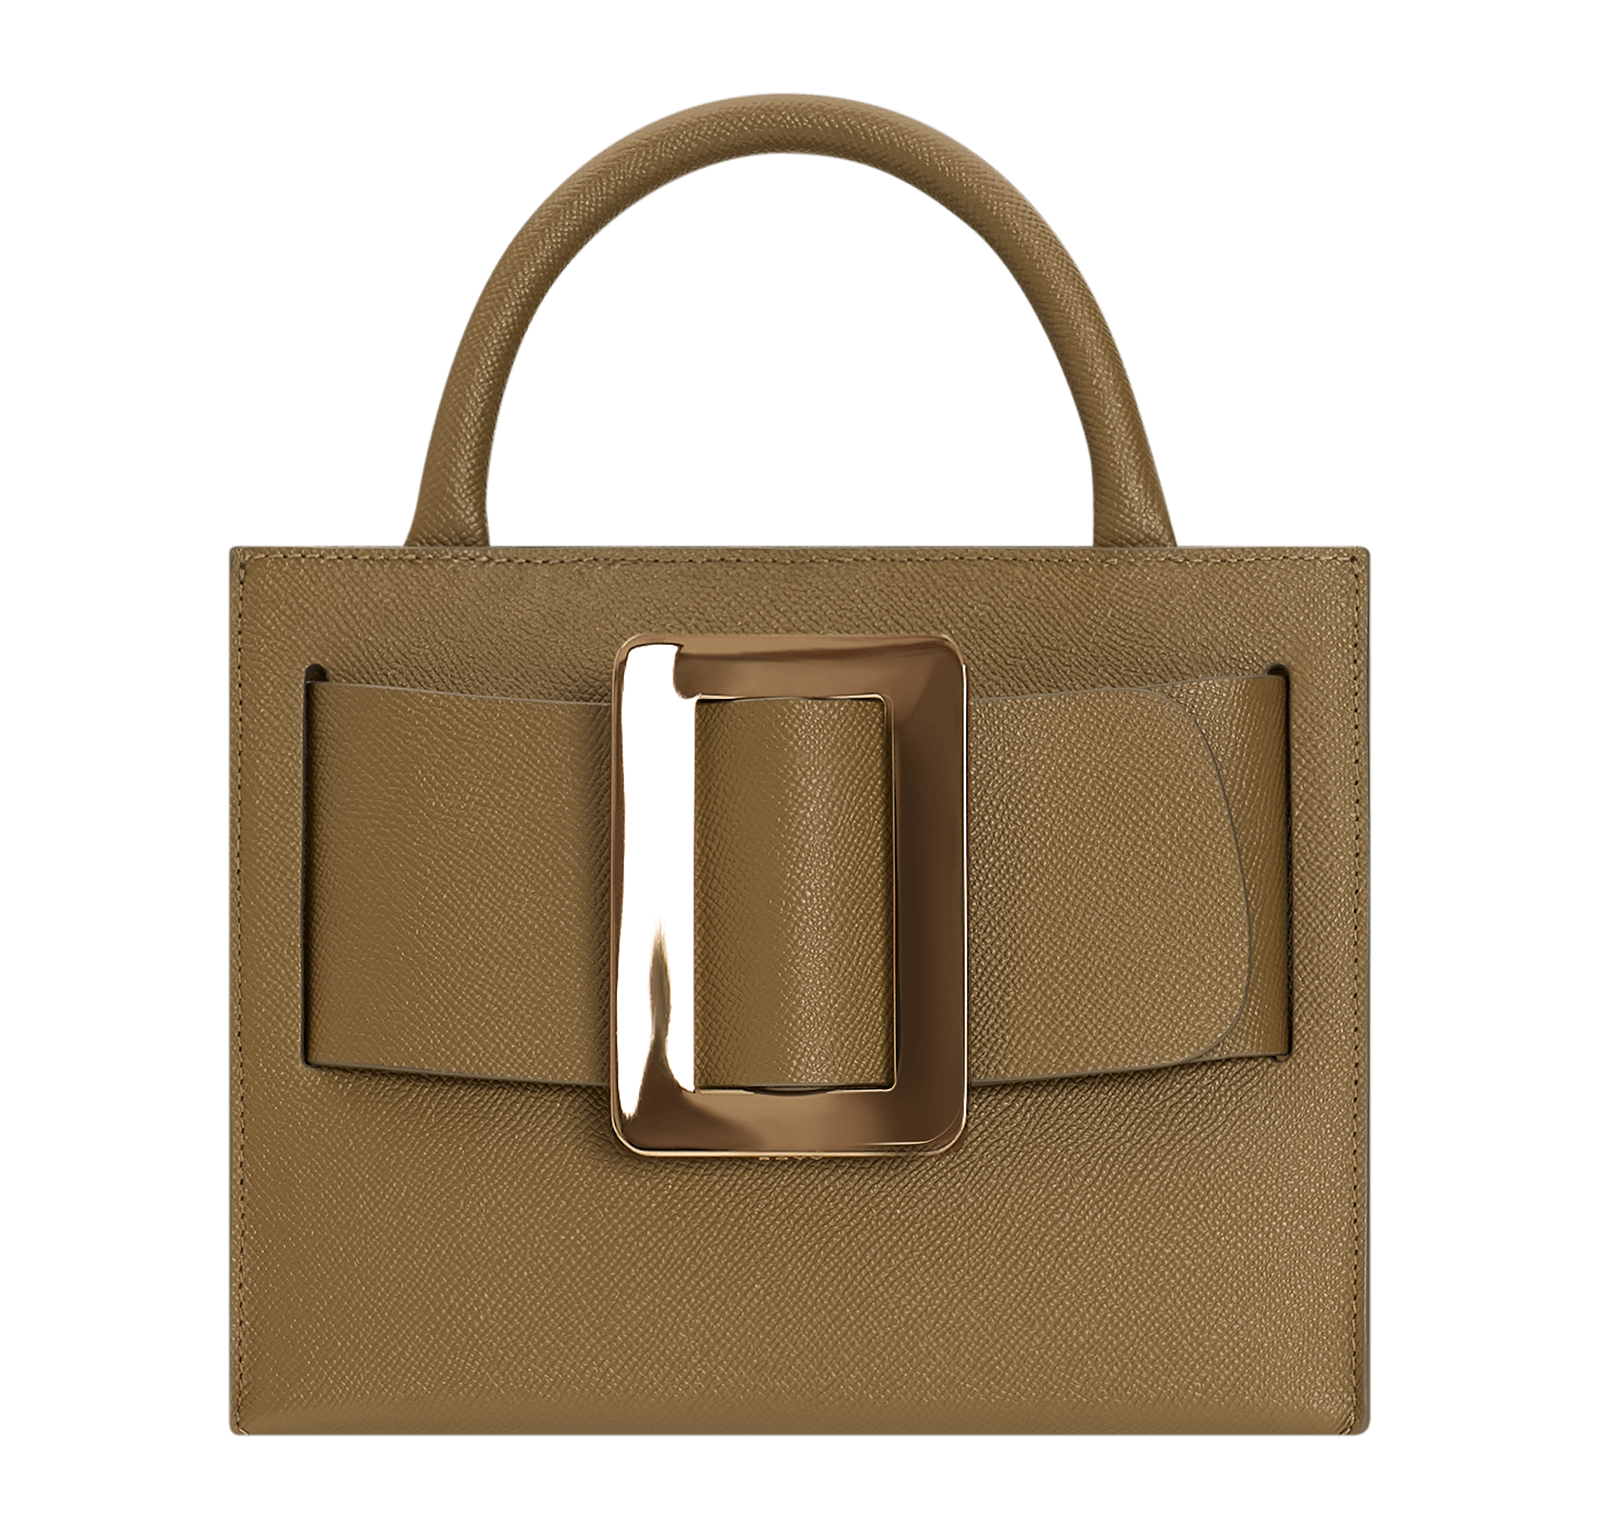 Medium, structured brown handbag with a large gold buckle on the front, carry strap, and twin handles. Made with grained calfskin leather.